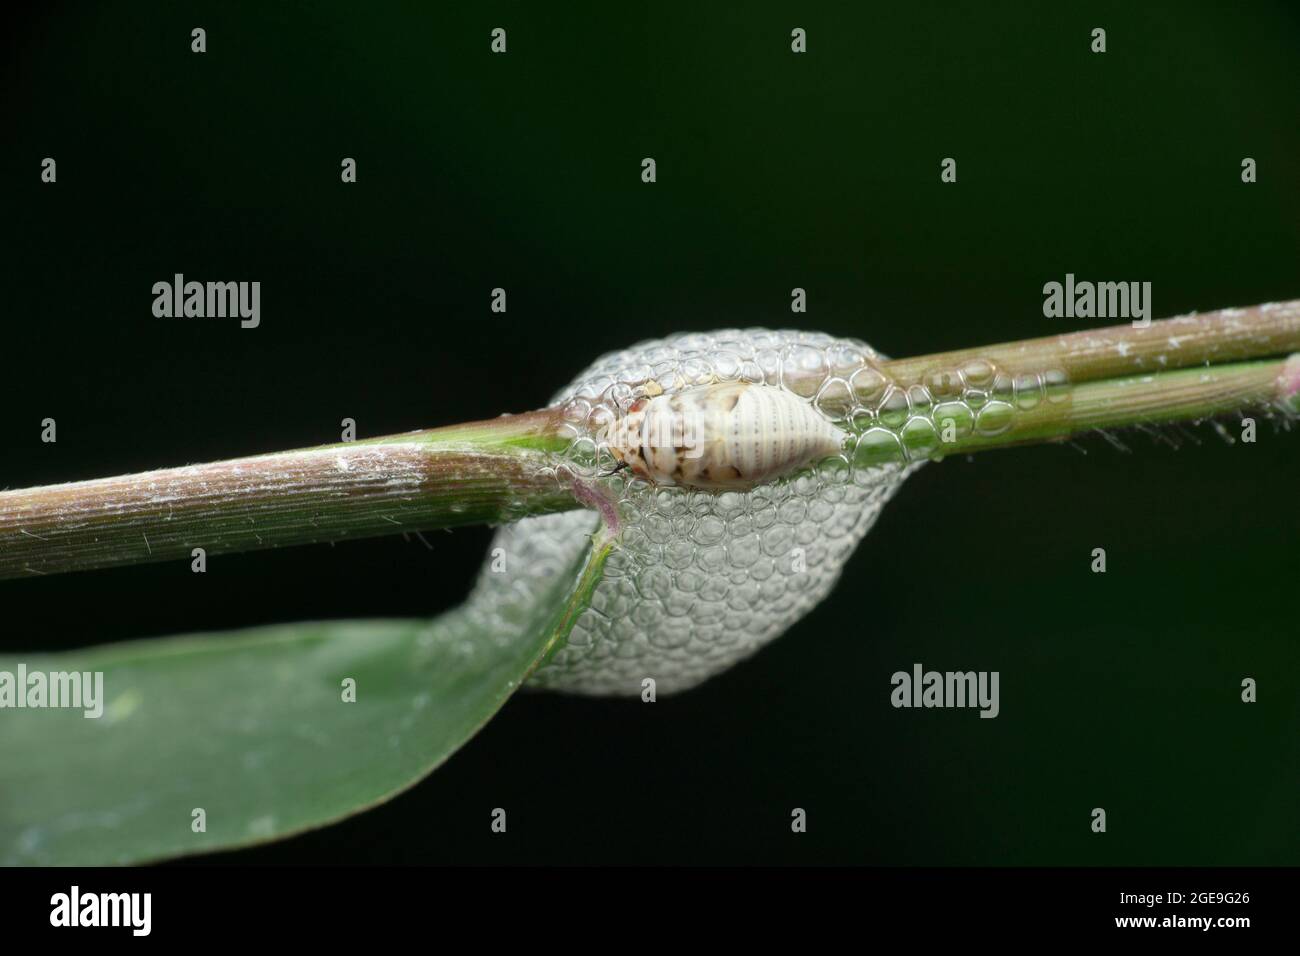 Nymphal form of spittlebug encased in foam for protection and moisture, prosapia species, Satara, Maharashtra, India Stock Photo